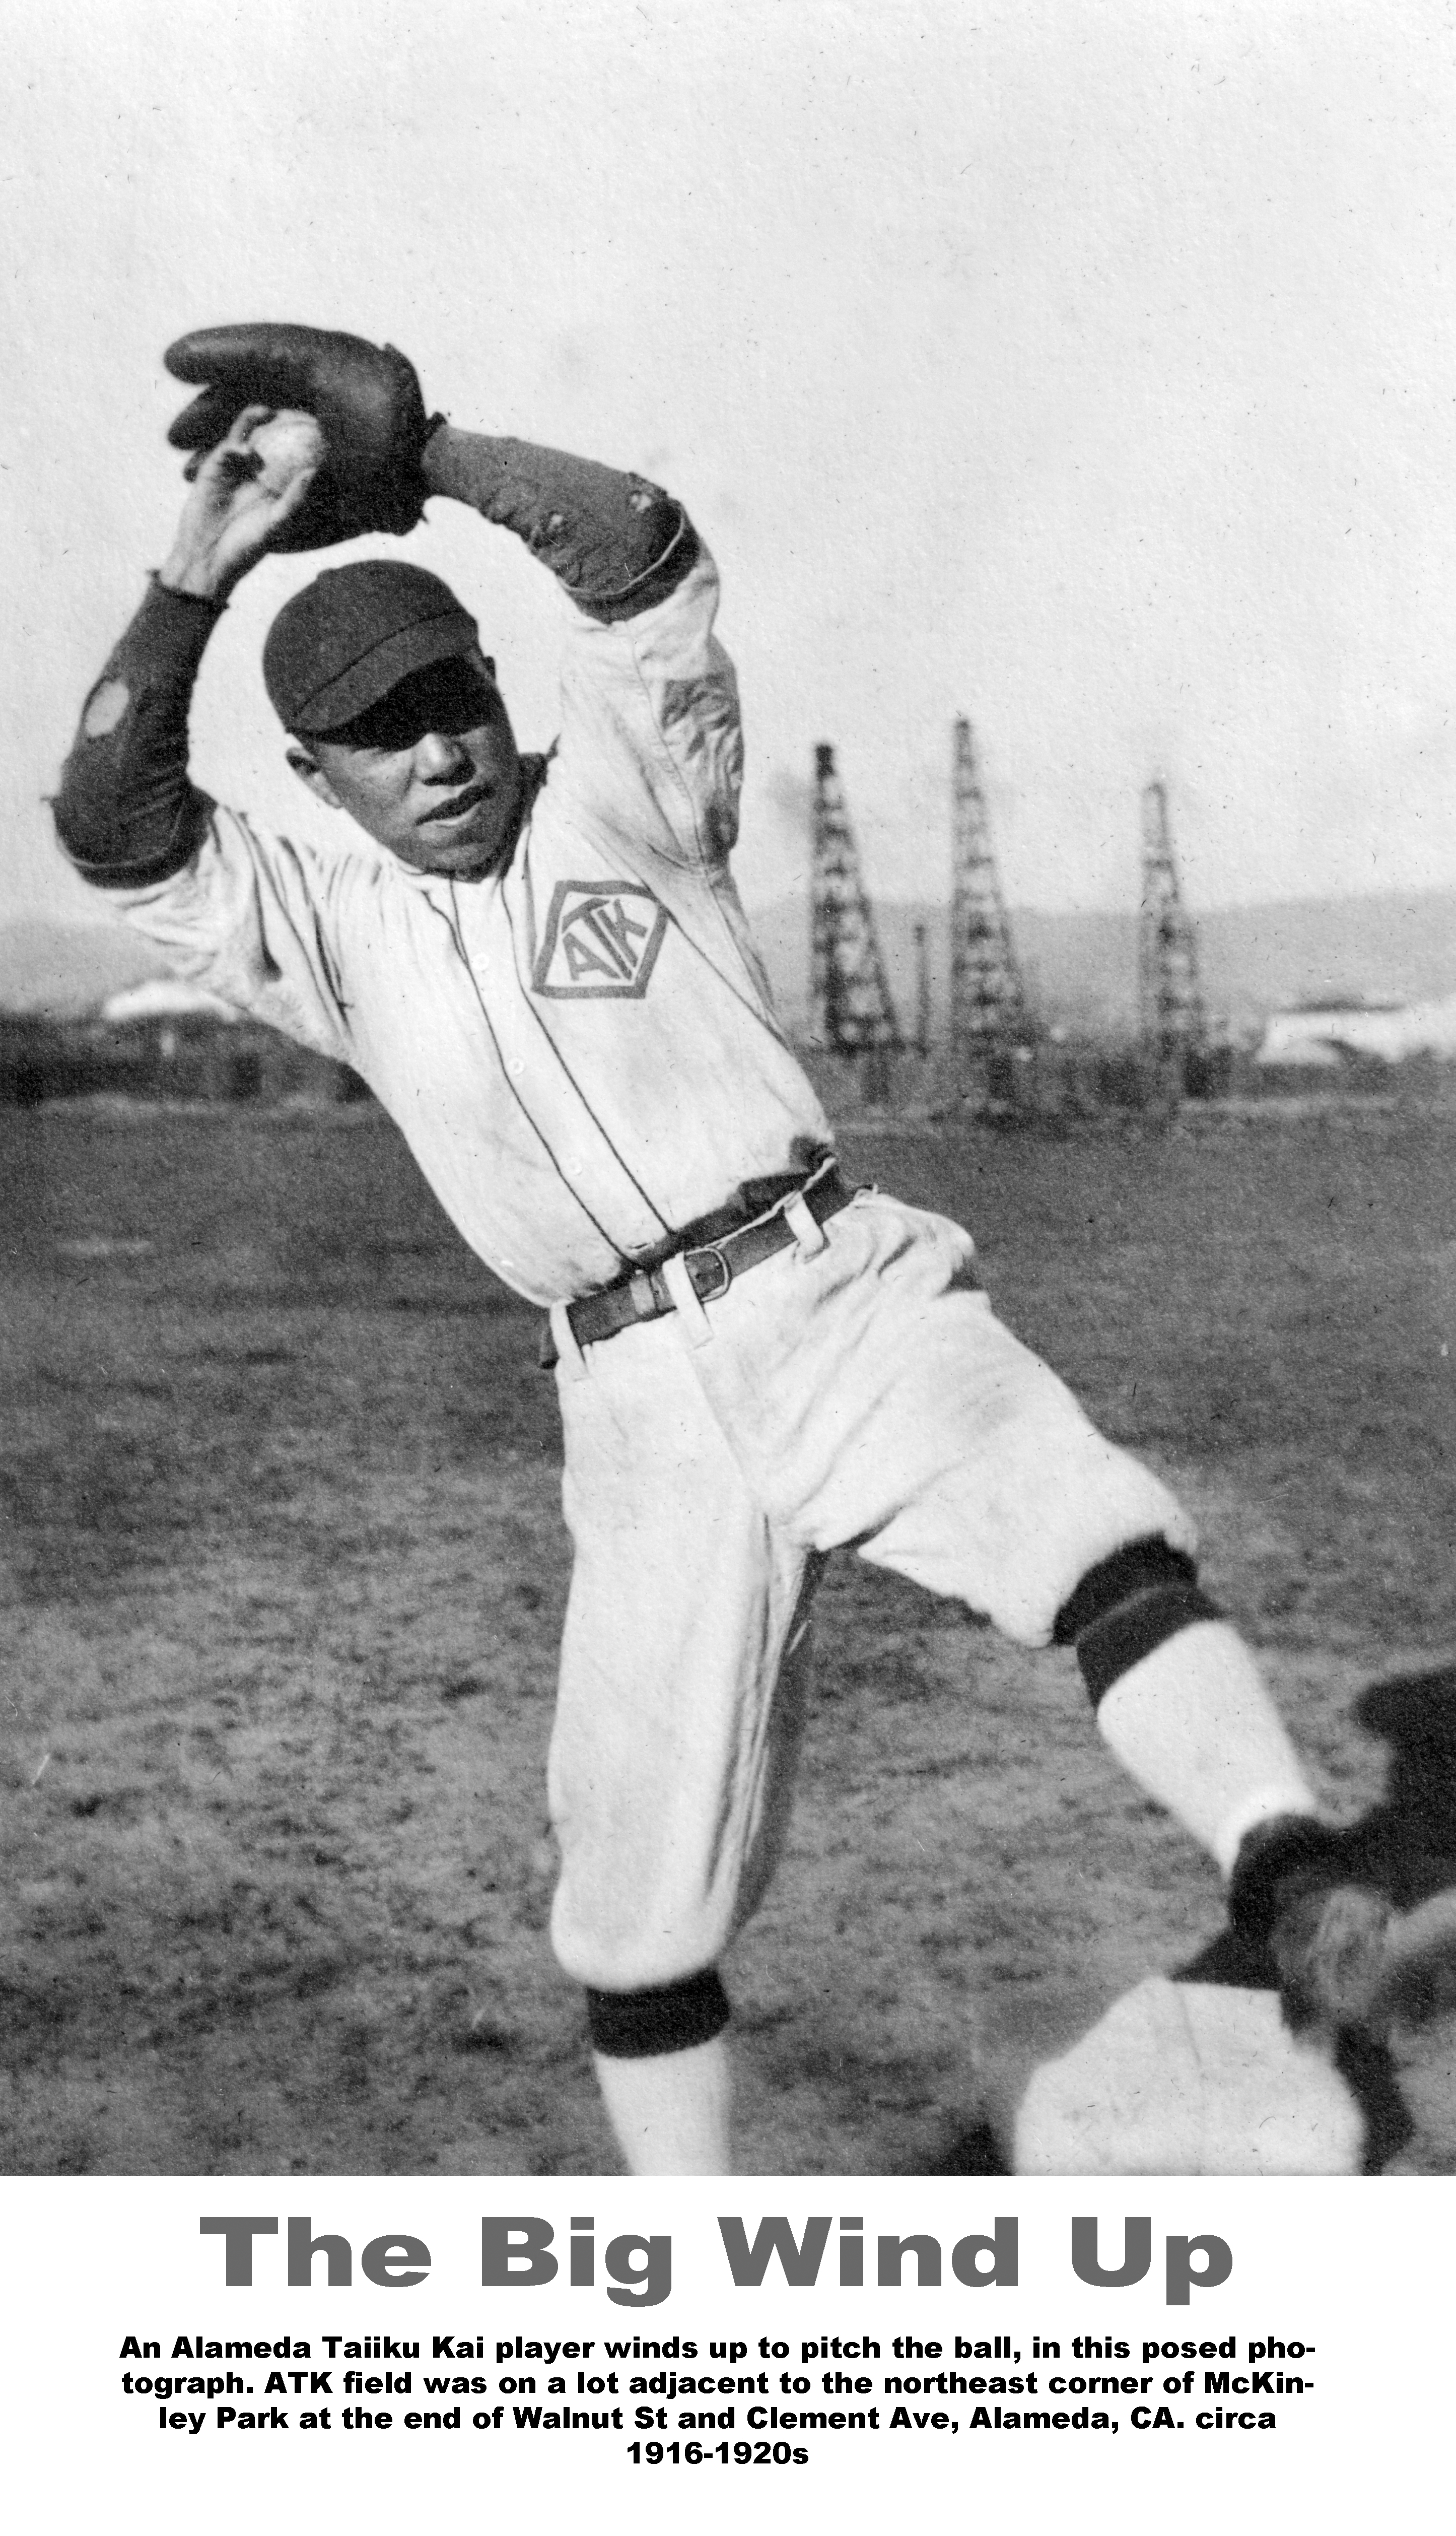 ddr-ajah-5-61 — Man in baseball uniform in posed photo titled The Big Wind  Up